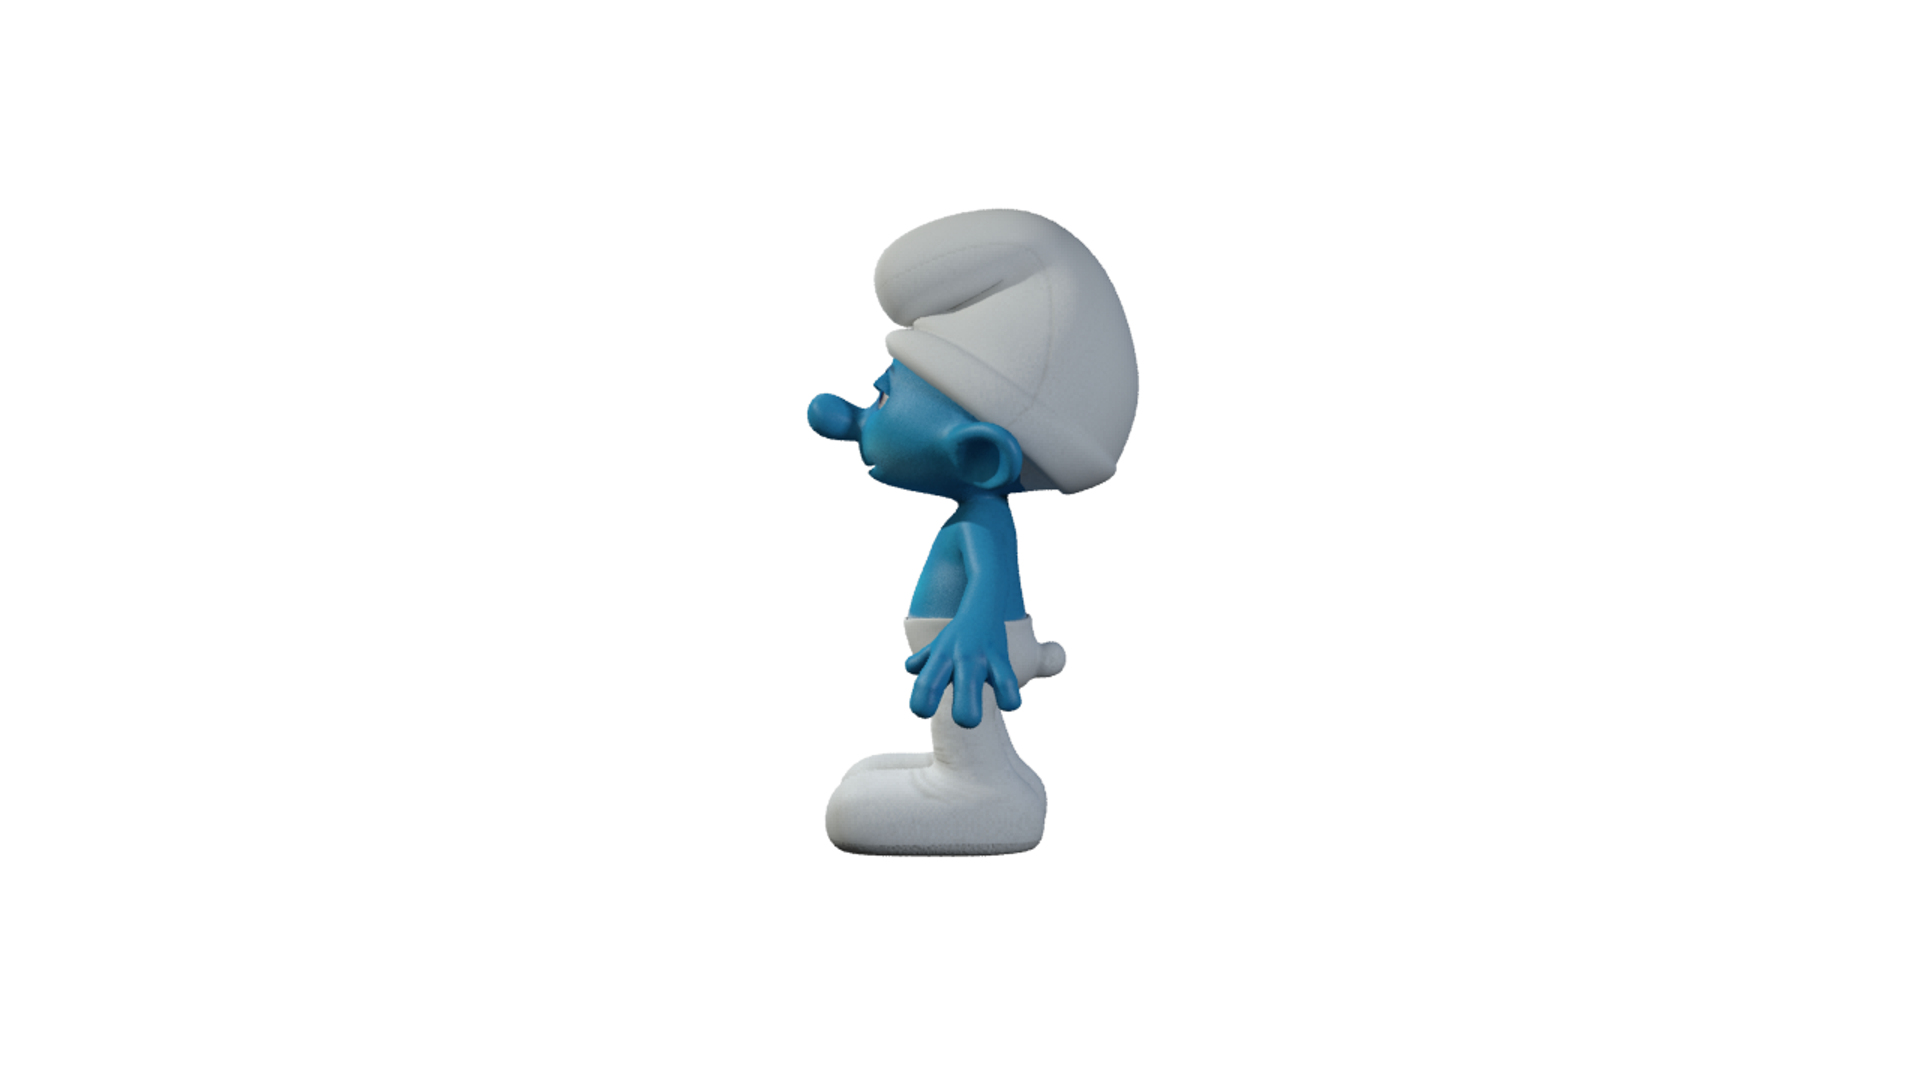 the smurfs wallpaper clumsy